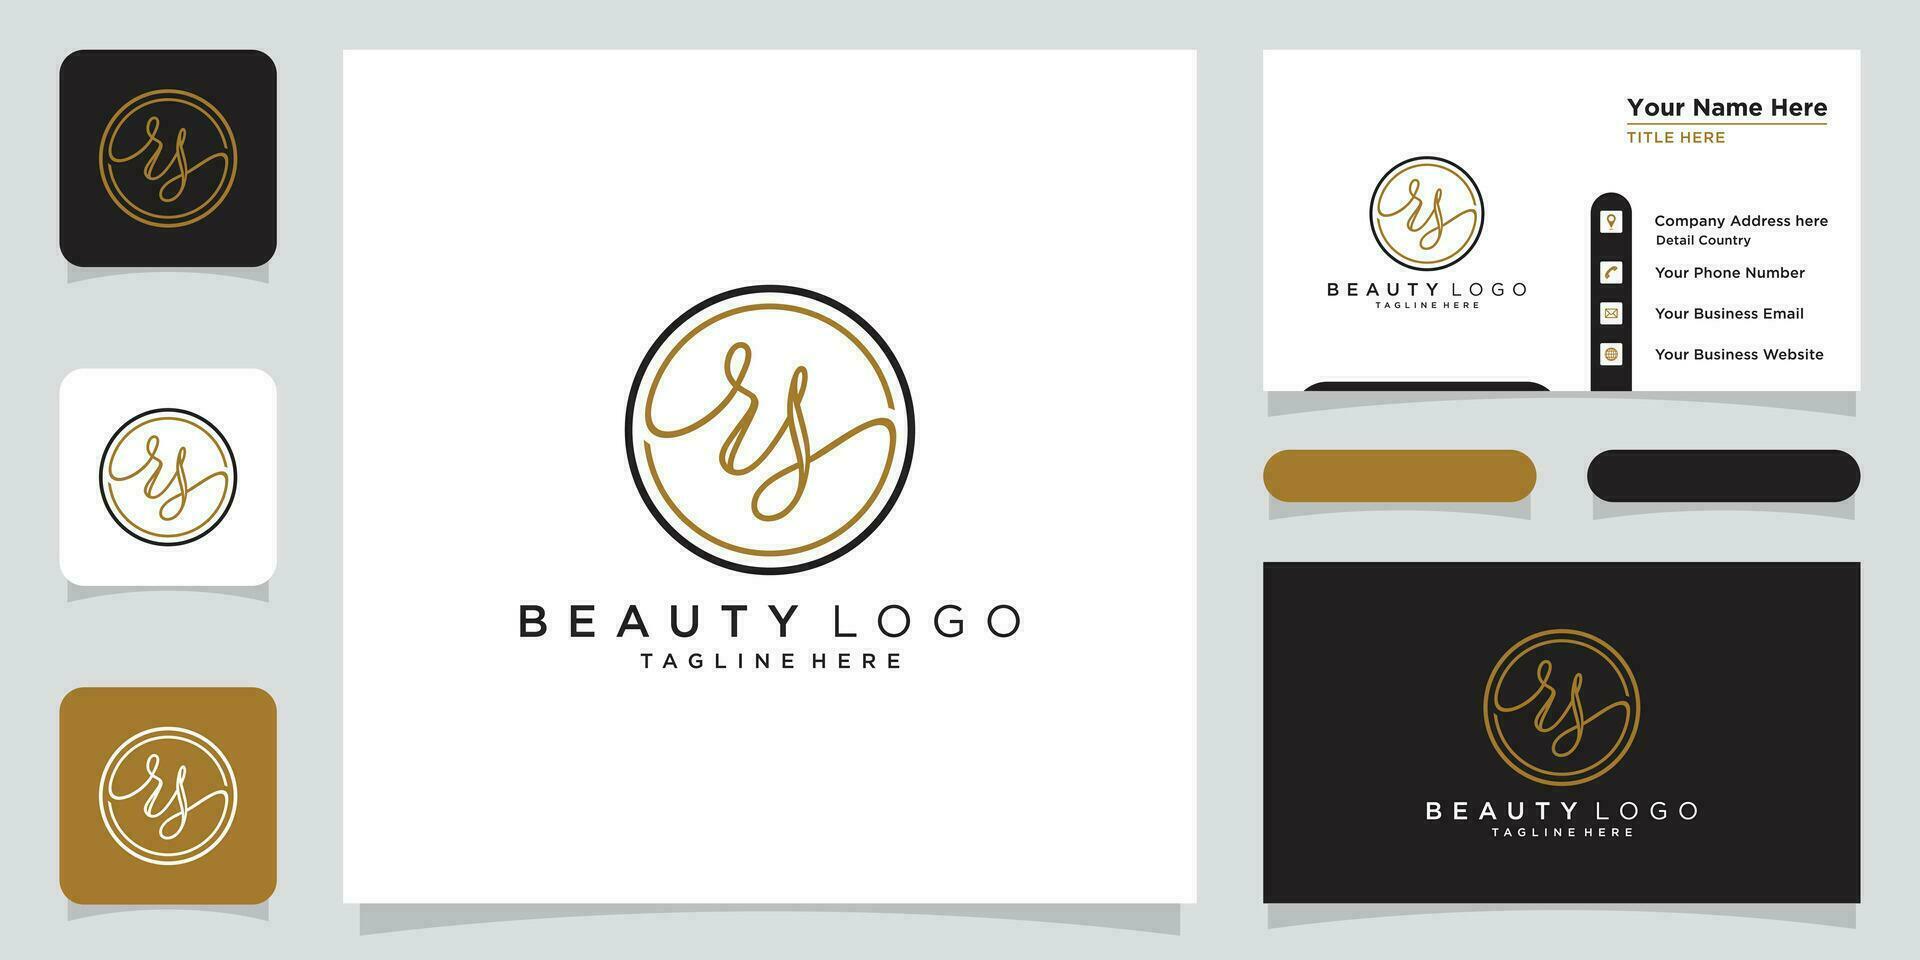 RS Initial handwriting logo vector with business card design Premium Vector